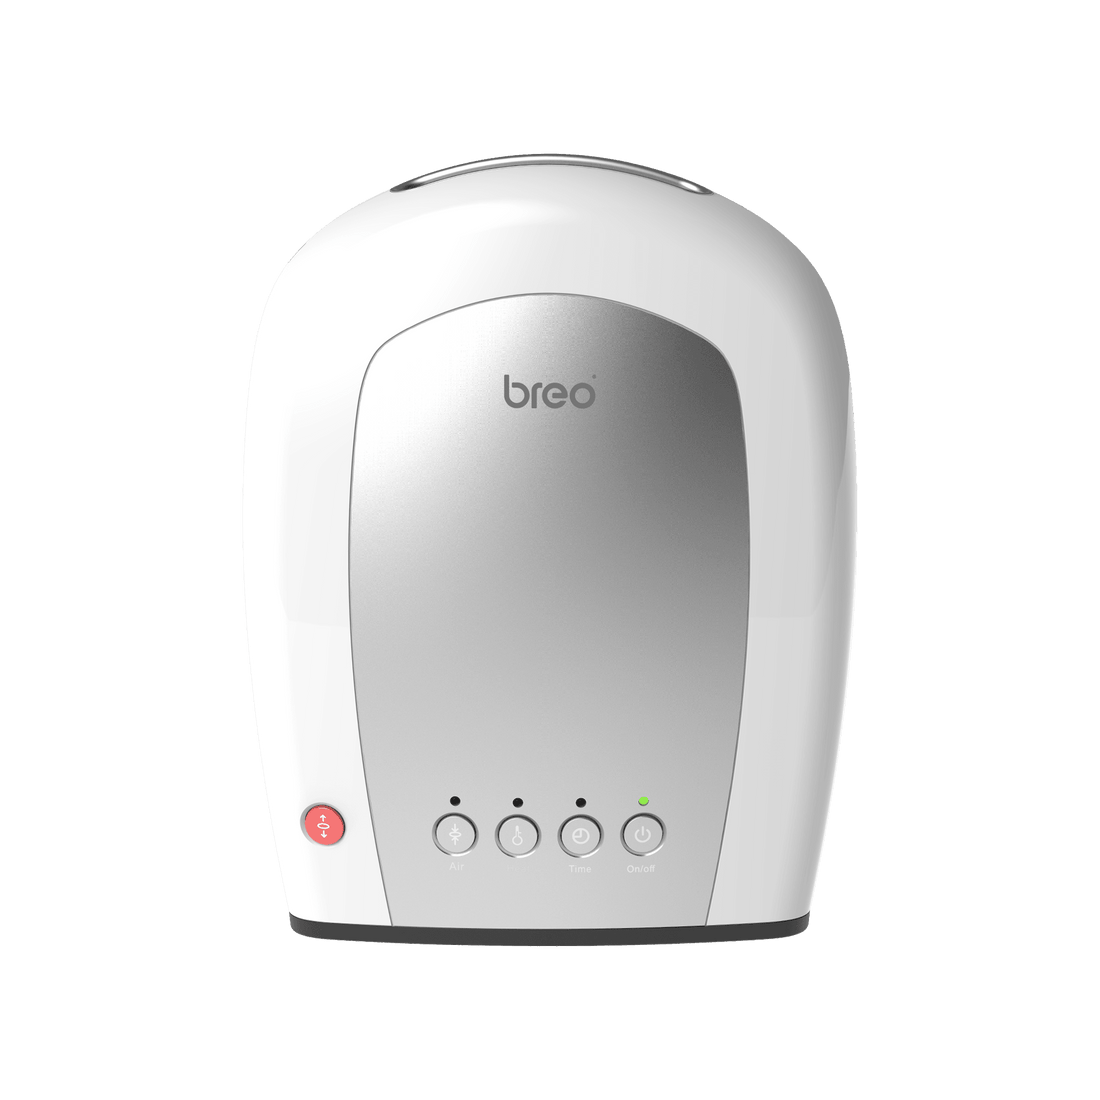 https://www.momjunction.com/wp-content/uploads/product-images/breo-ipalm-520-electric-acupressure-hand-massager_afl66.png